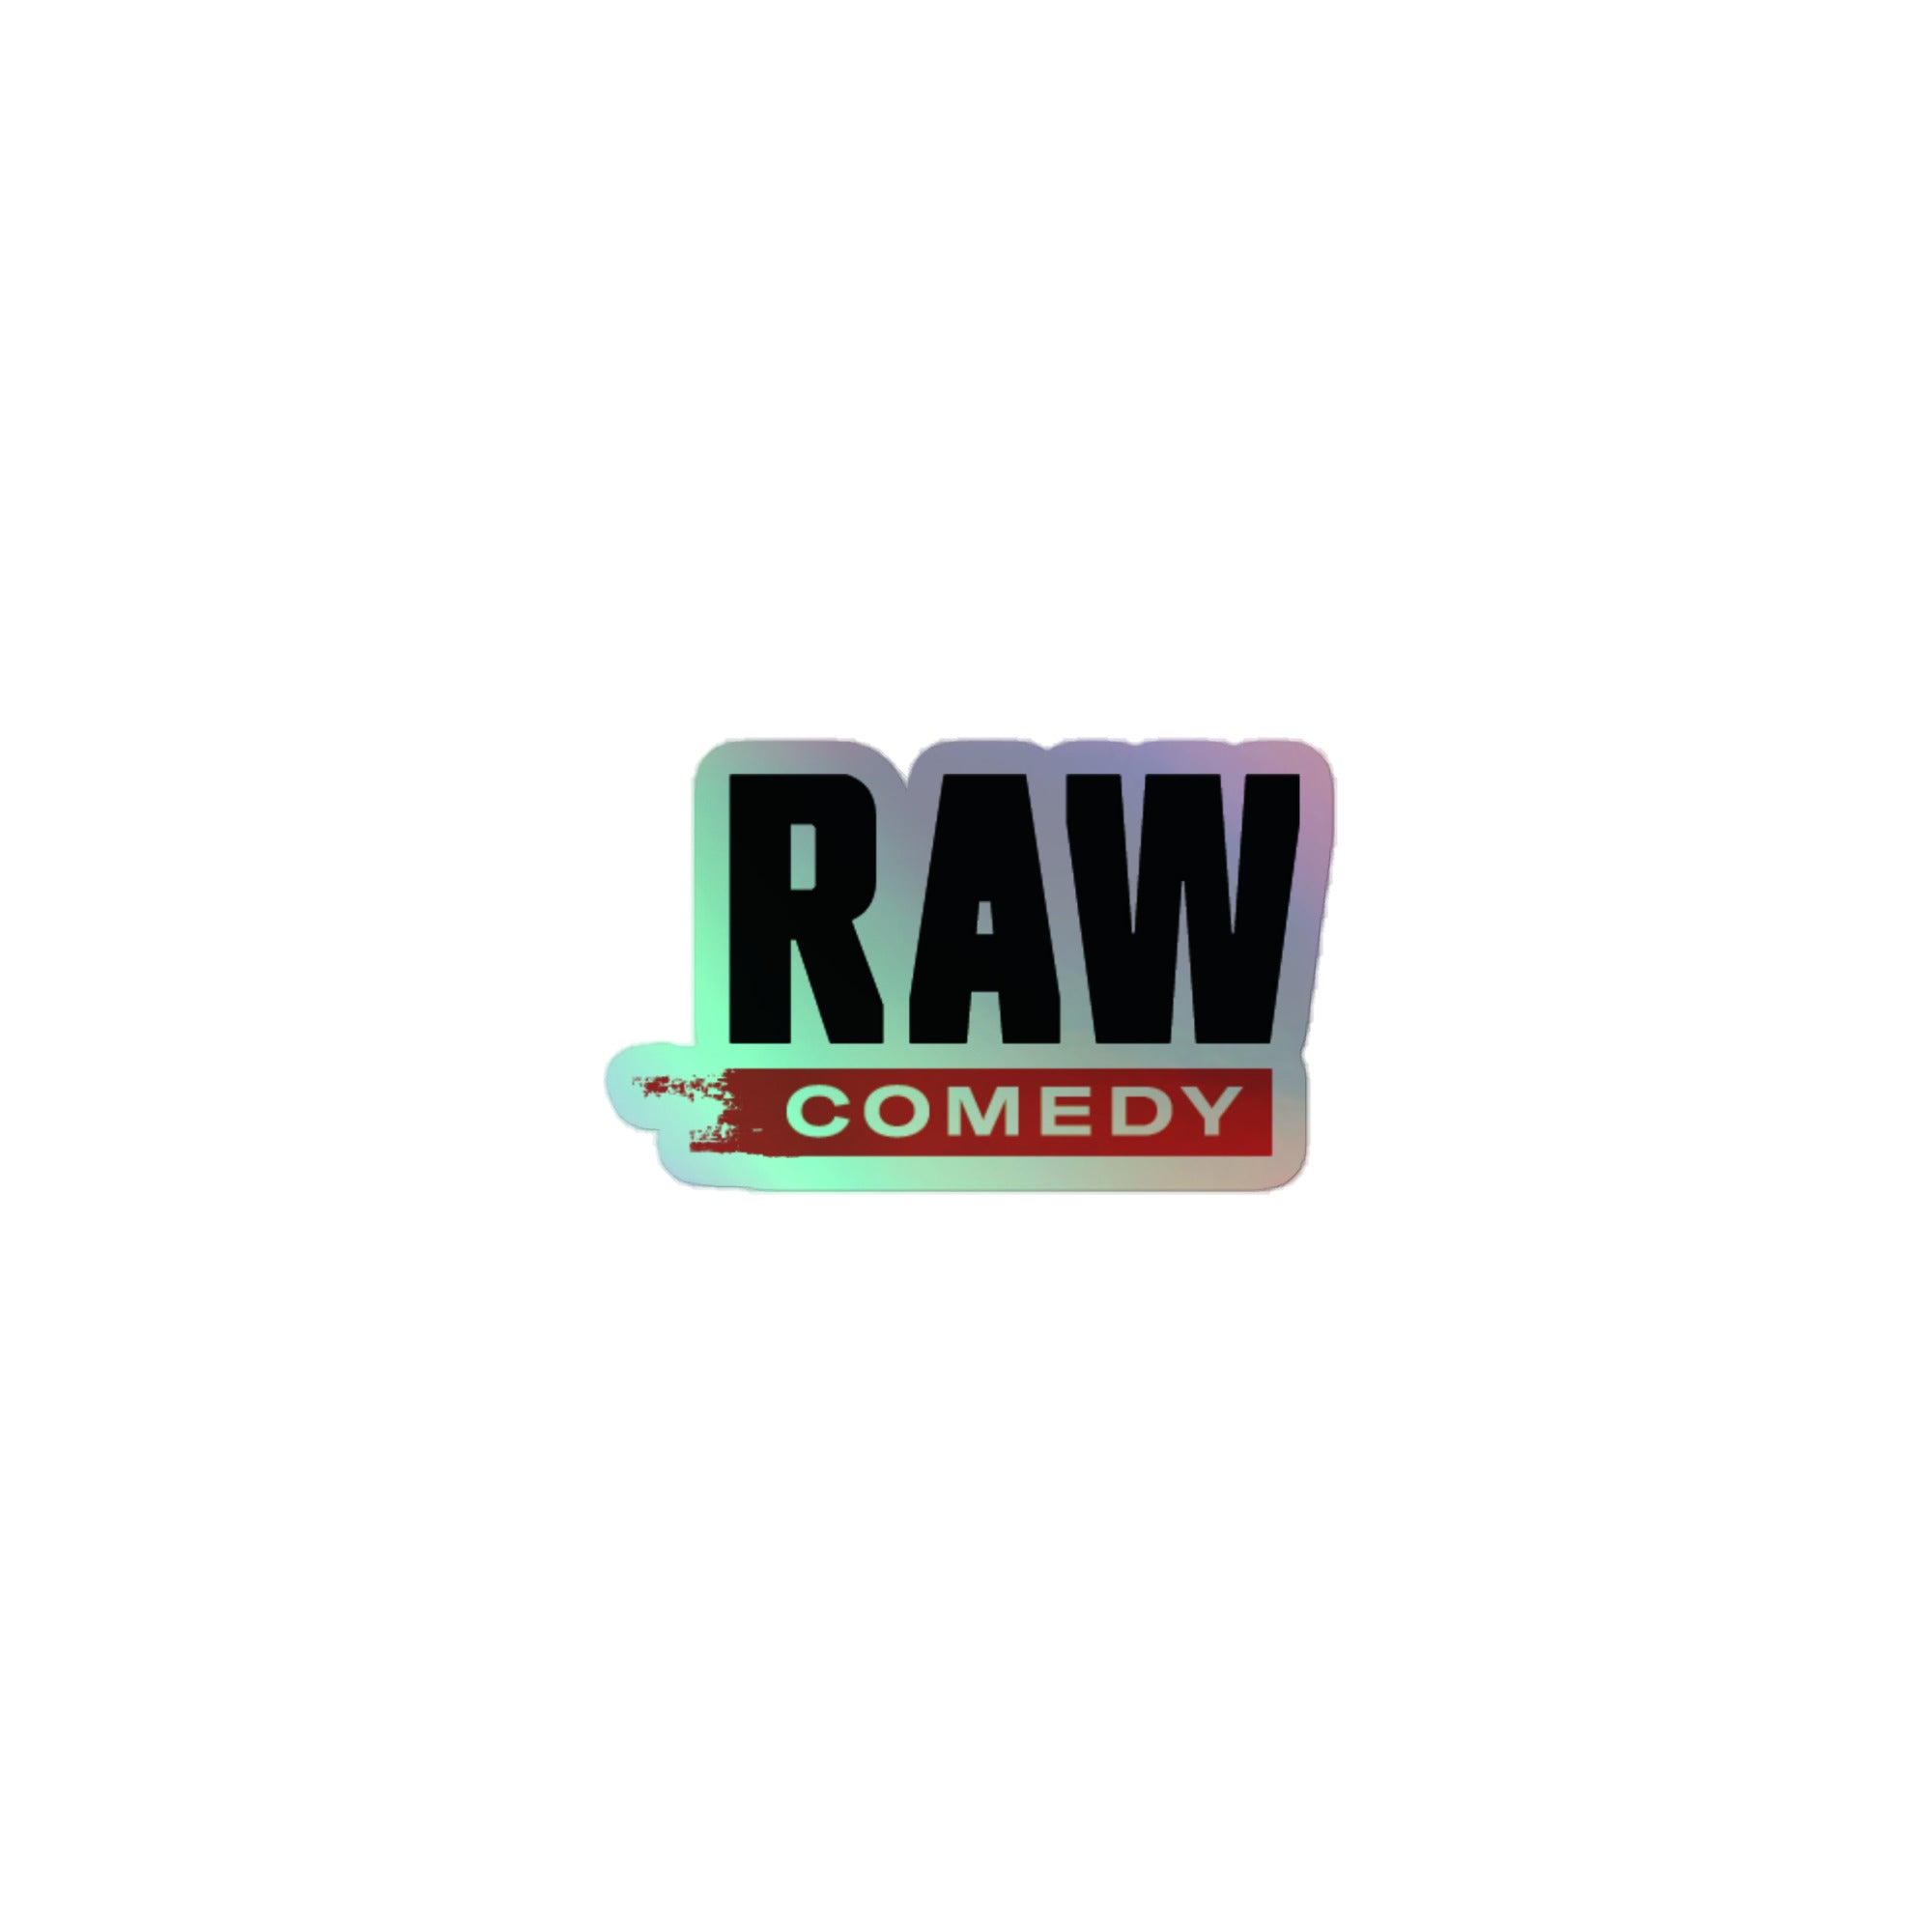 Raw Comedy: Holographic Sticker